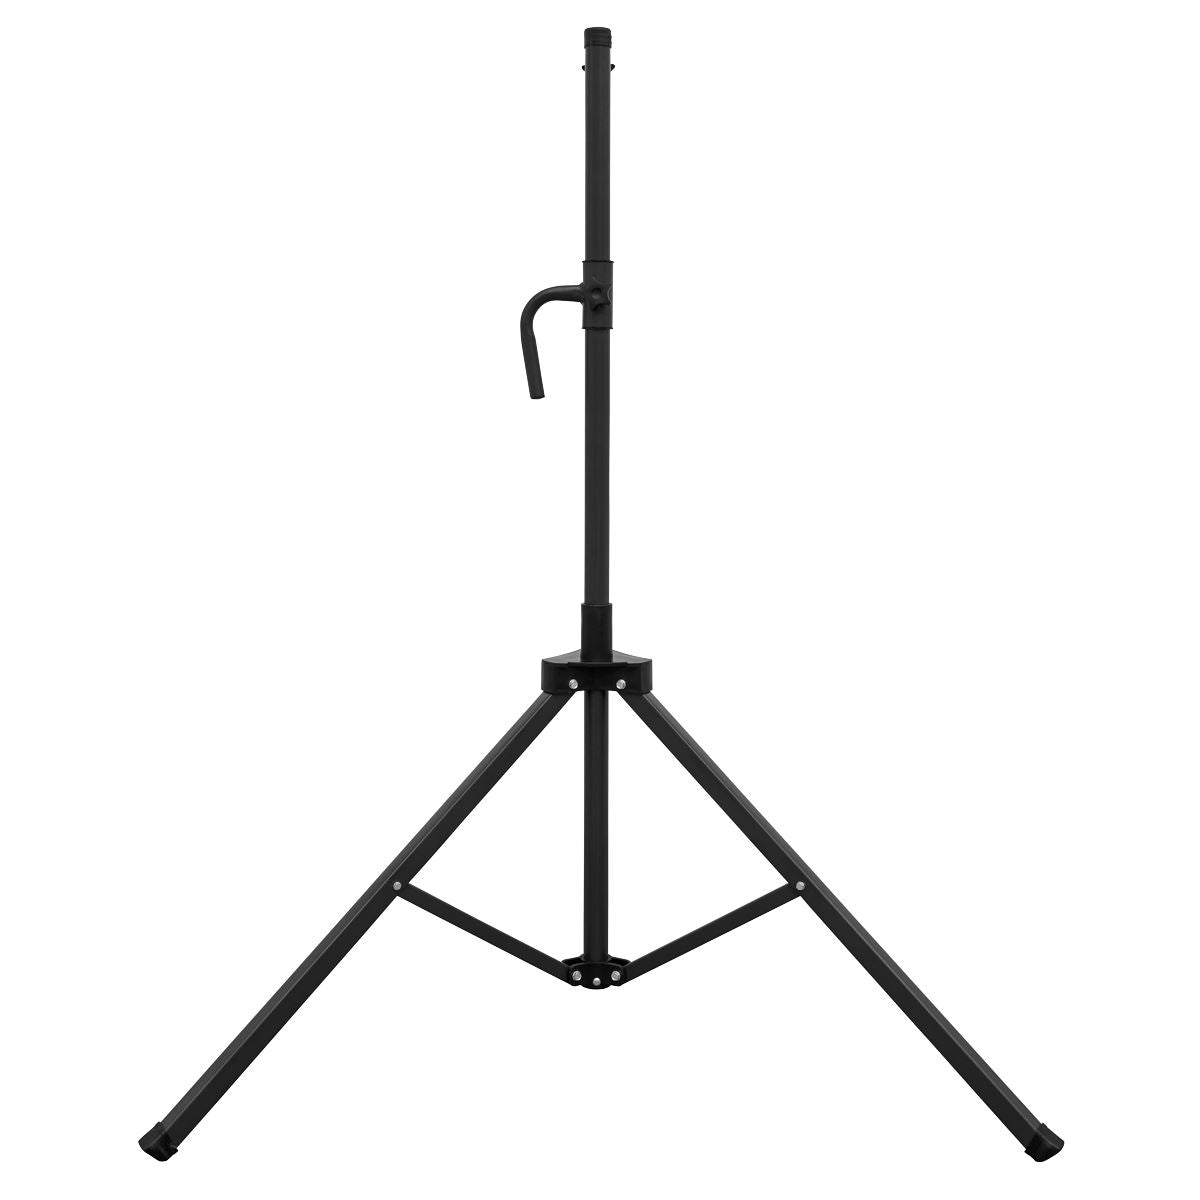 Sealey Tripod Stand for IR Heaters